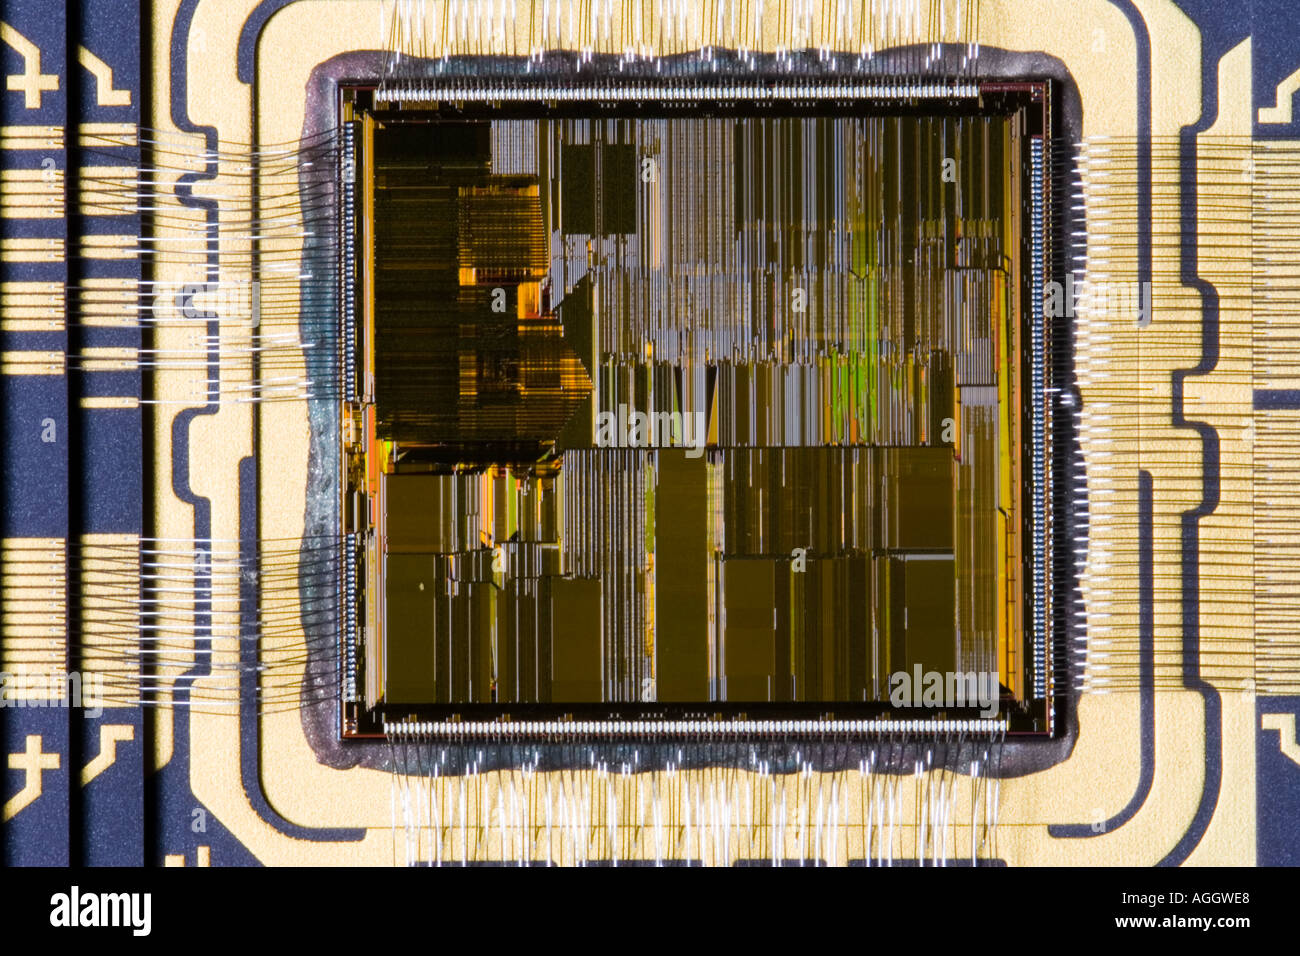 A close up of an Intel Pentium processor from a PC showing the microscopic details of the chip, Stock Photo